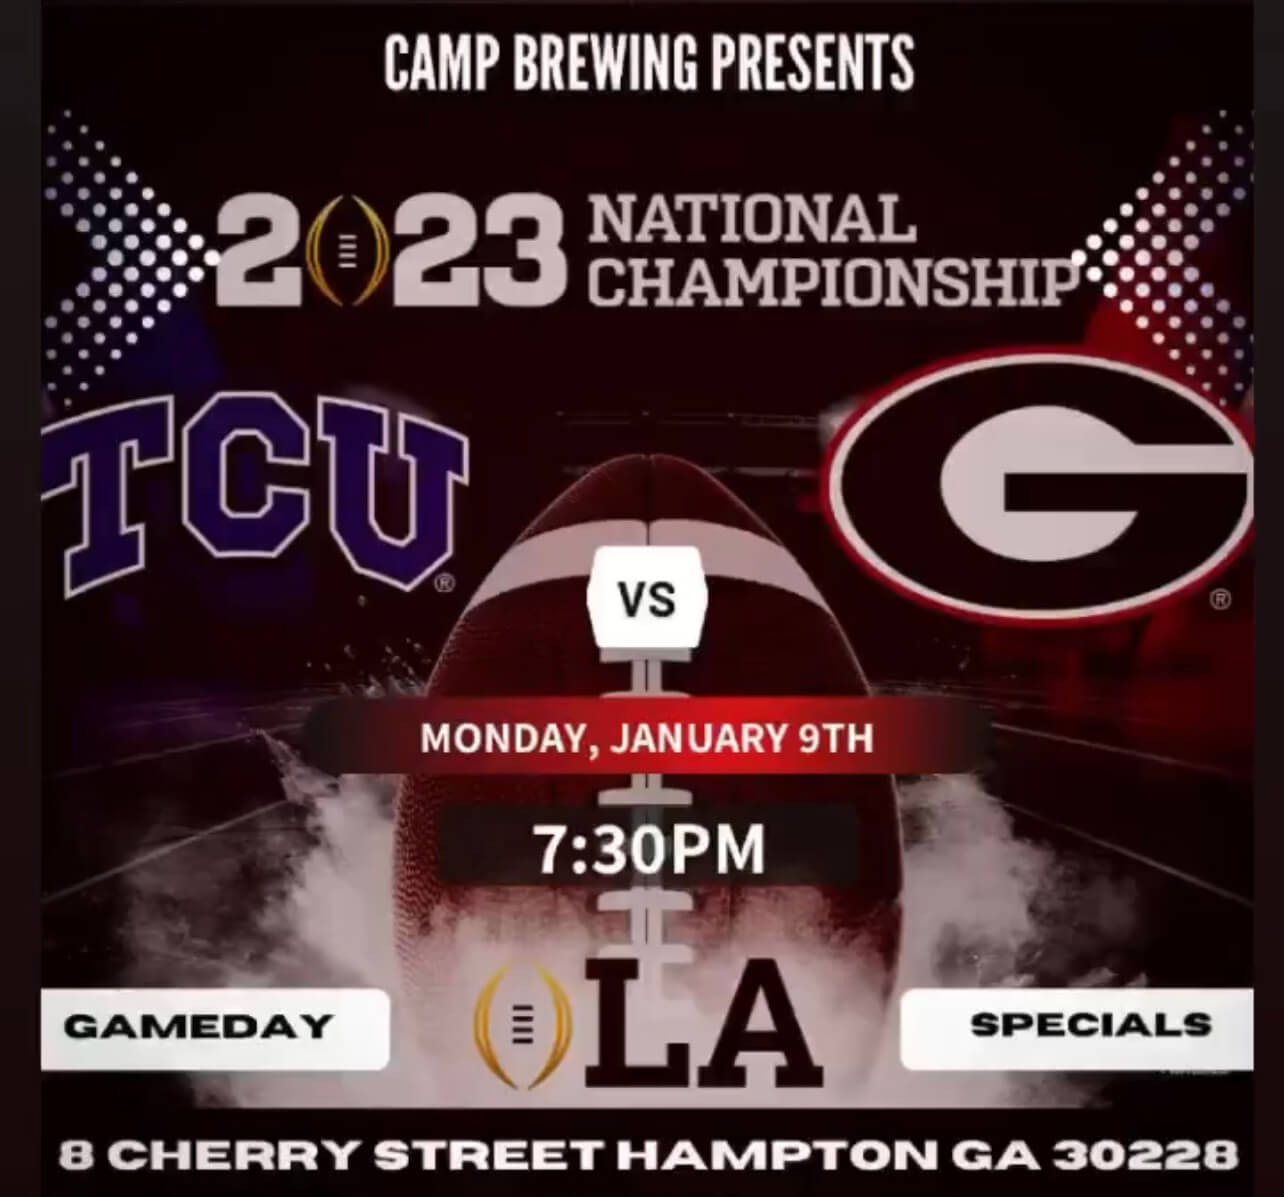 camp brewing company in hampton to watch national championship game